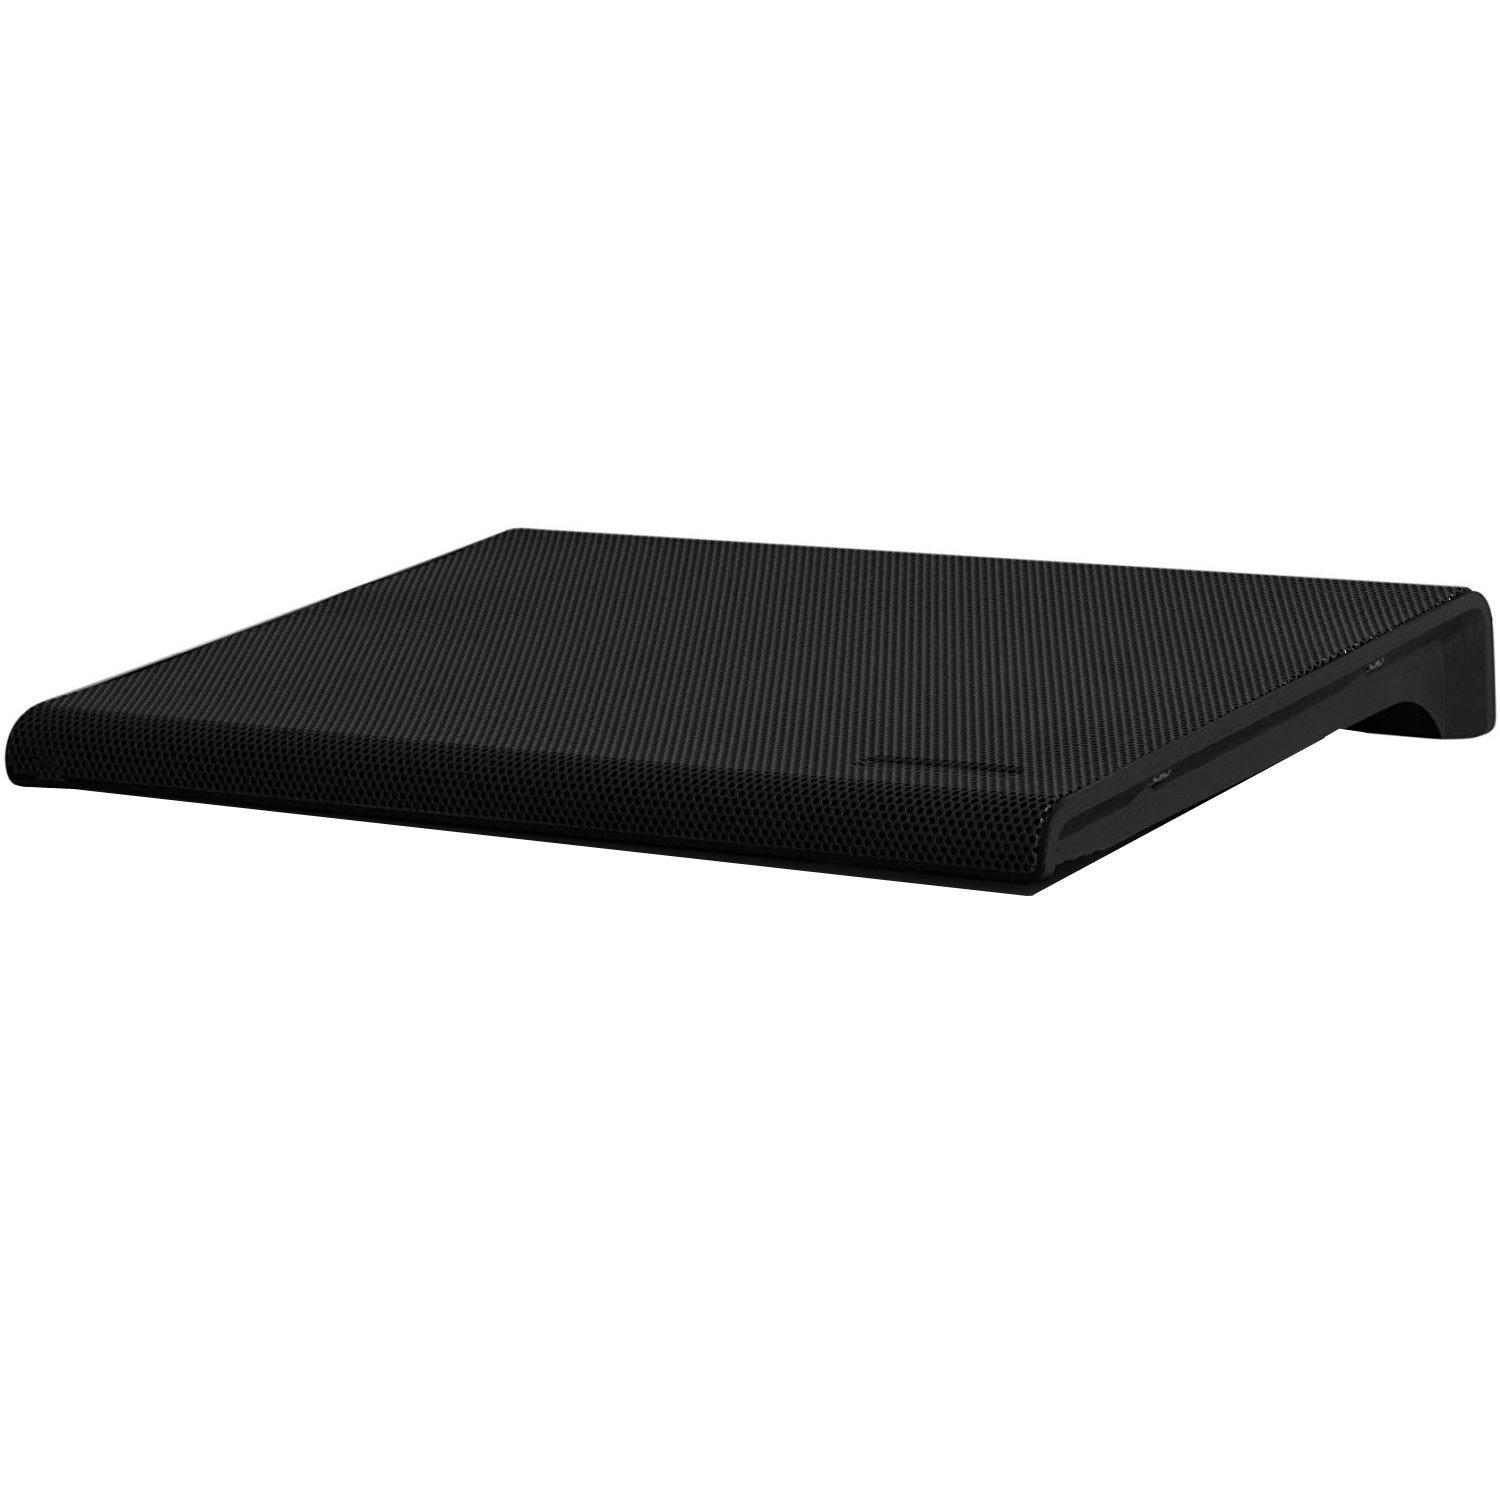 list item 2 of 3 Aluratek Slim USB Laptop Cooling Pad with Dual Fans